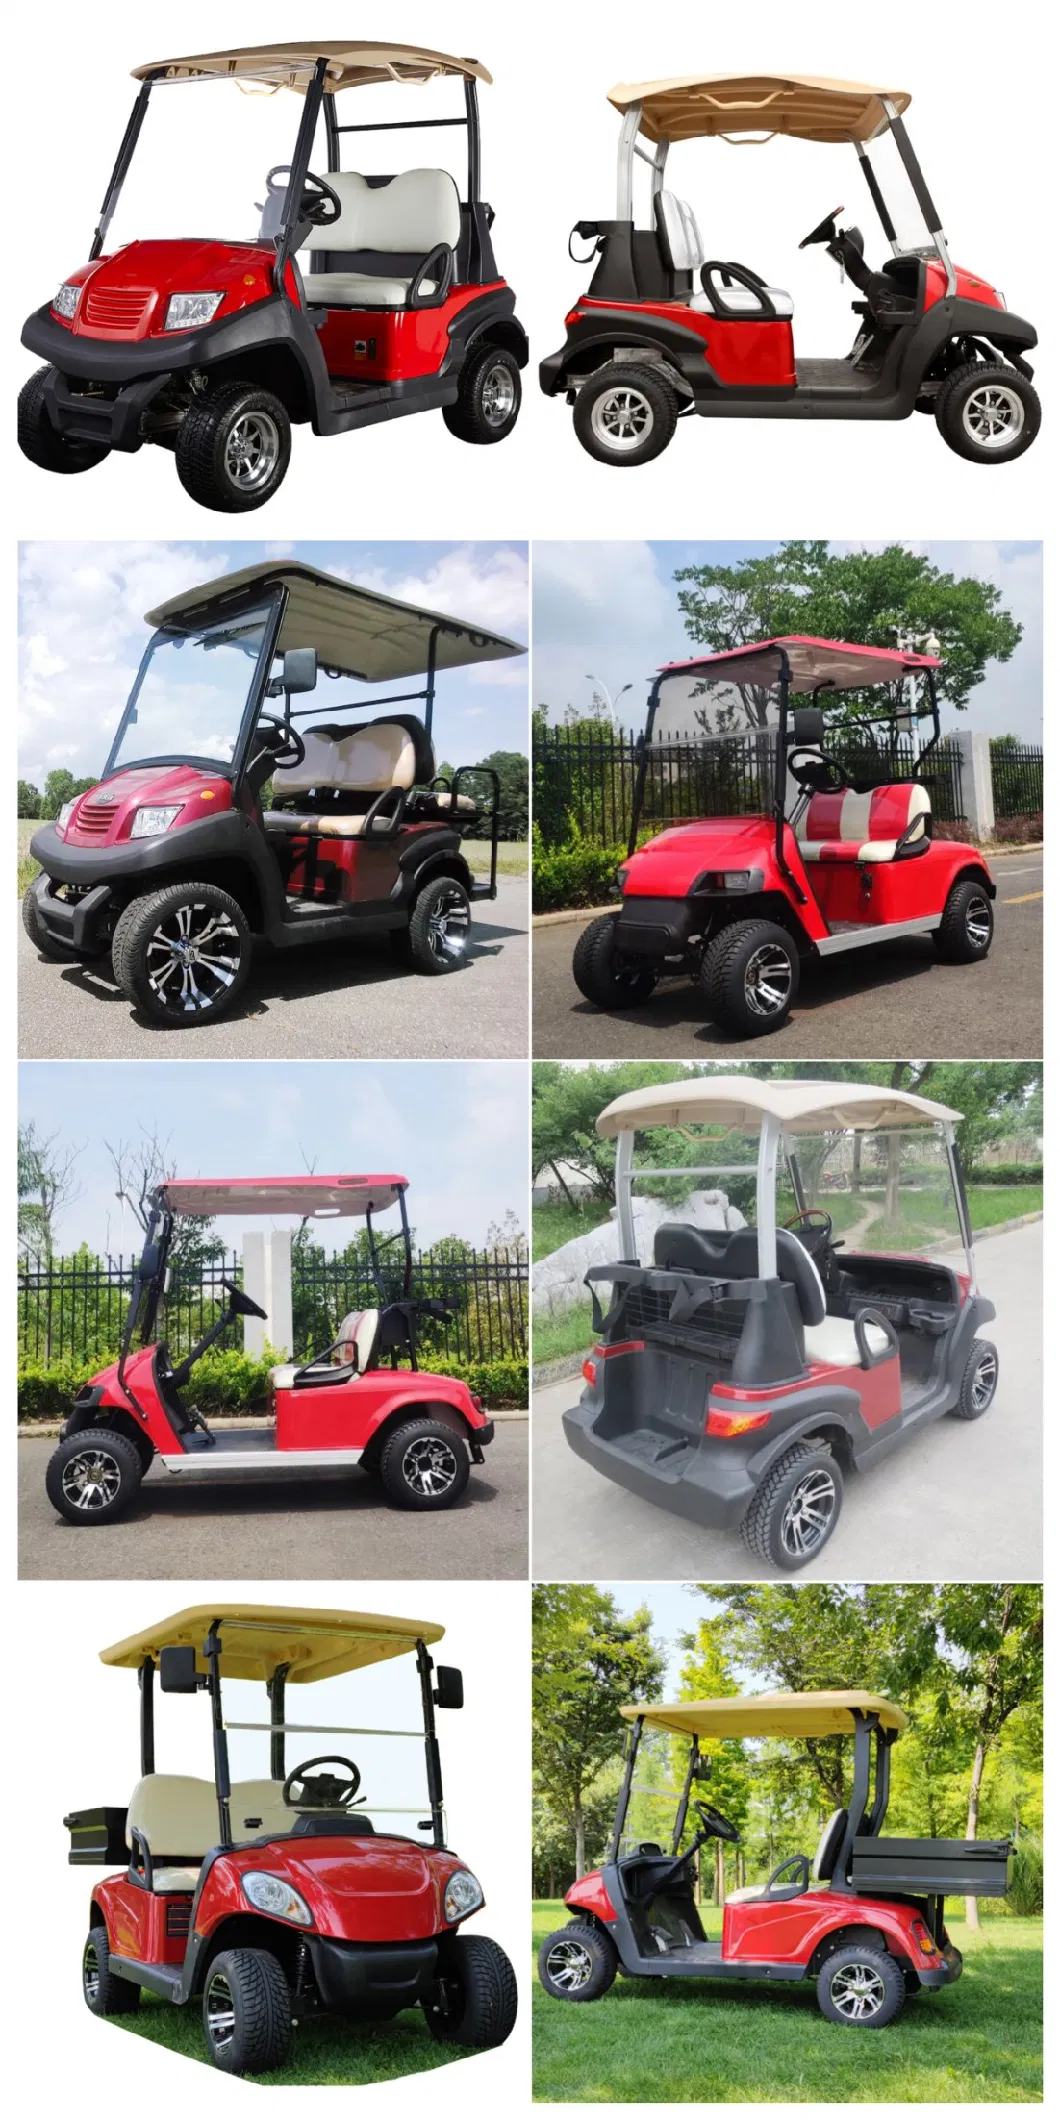 2-Seater Golf Cart with Lithium Battery Wholesale and Retail Latest Electric Car